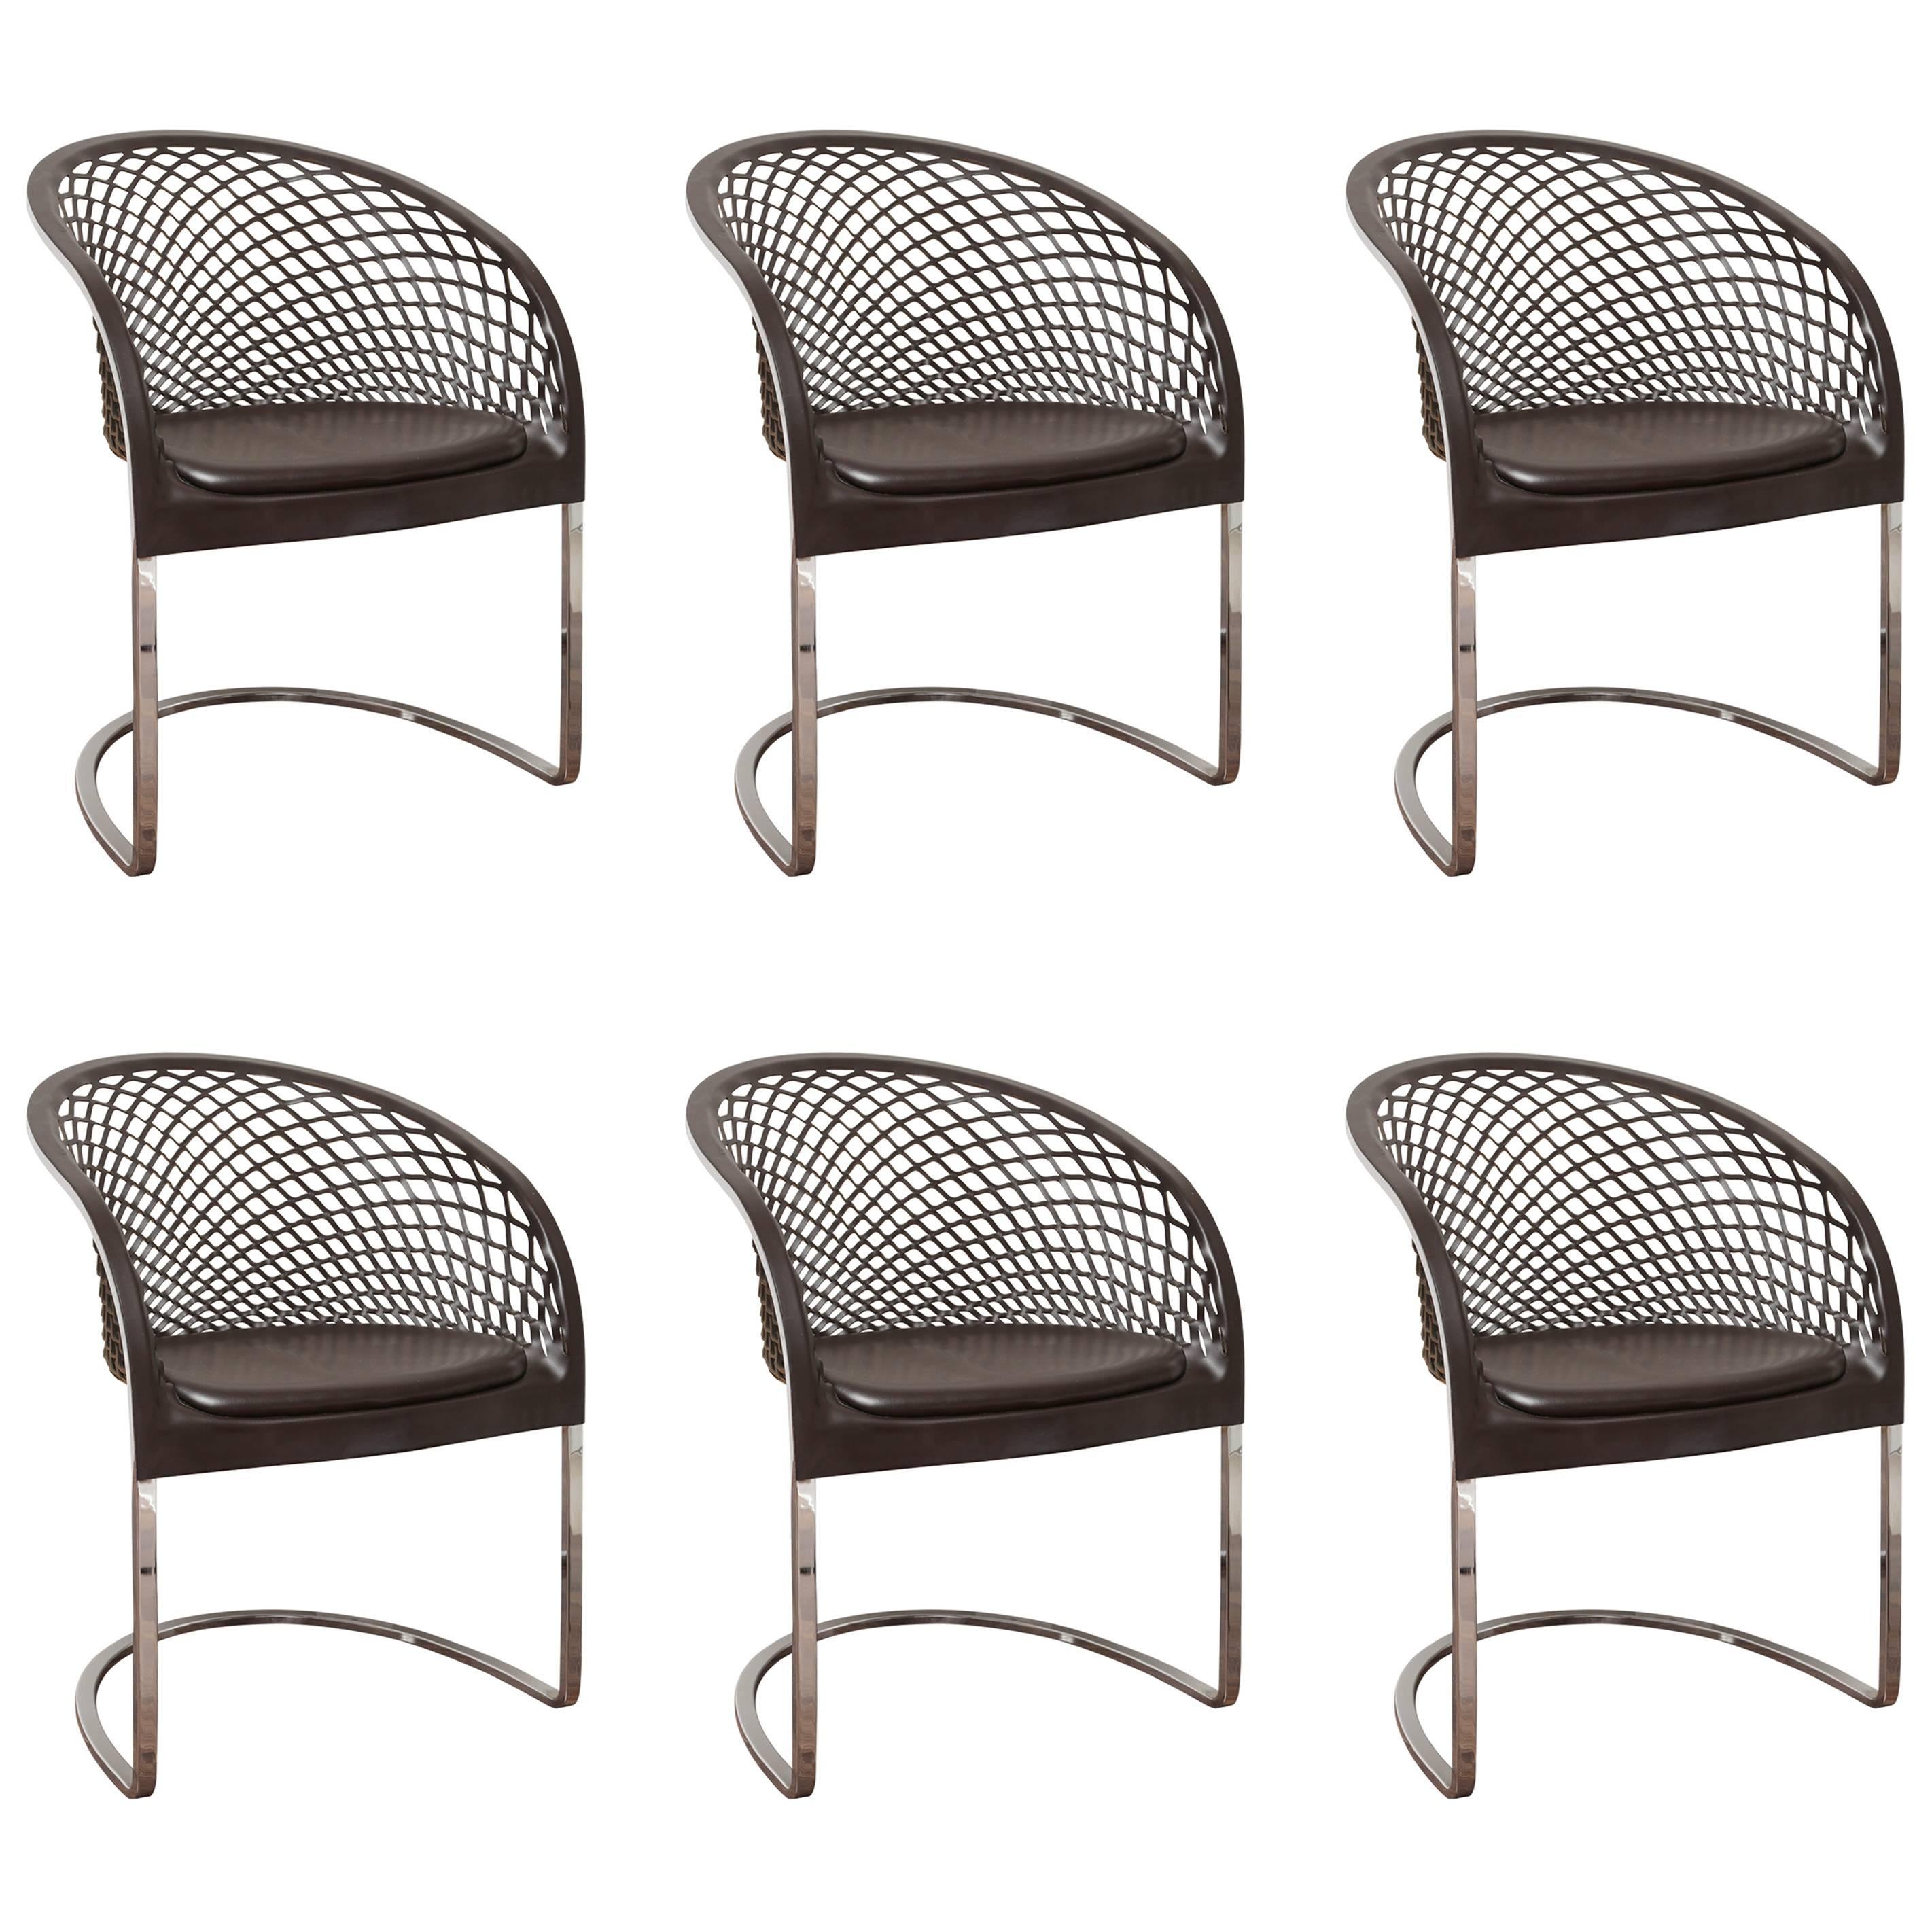 Set of Six Chrome and Leather Matteo Grassi Dining Chairs, 1970s